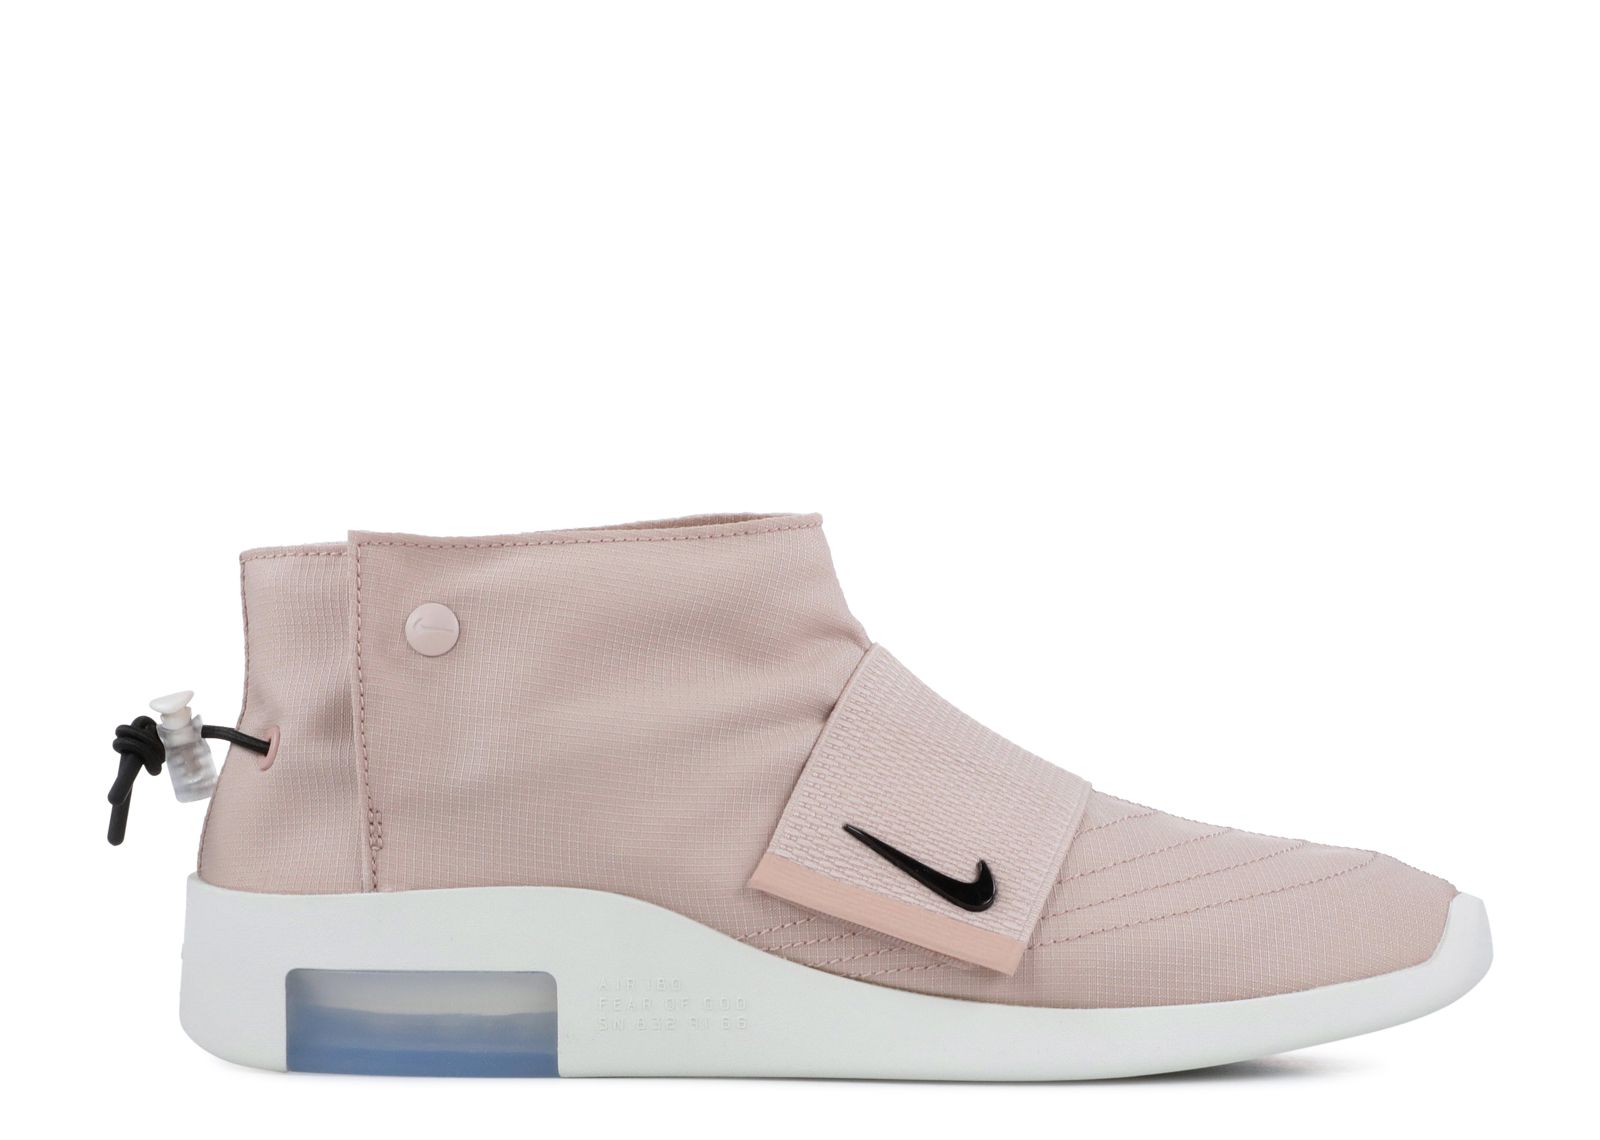 Кроссовки Nike Air Fear Of God Moc 'Particle Beige', кремовый creative moc compatible with lepininglys small particle puzzle block toy moc 11092 monster truck